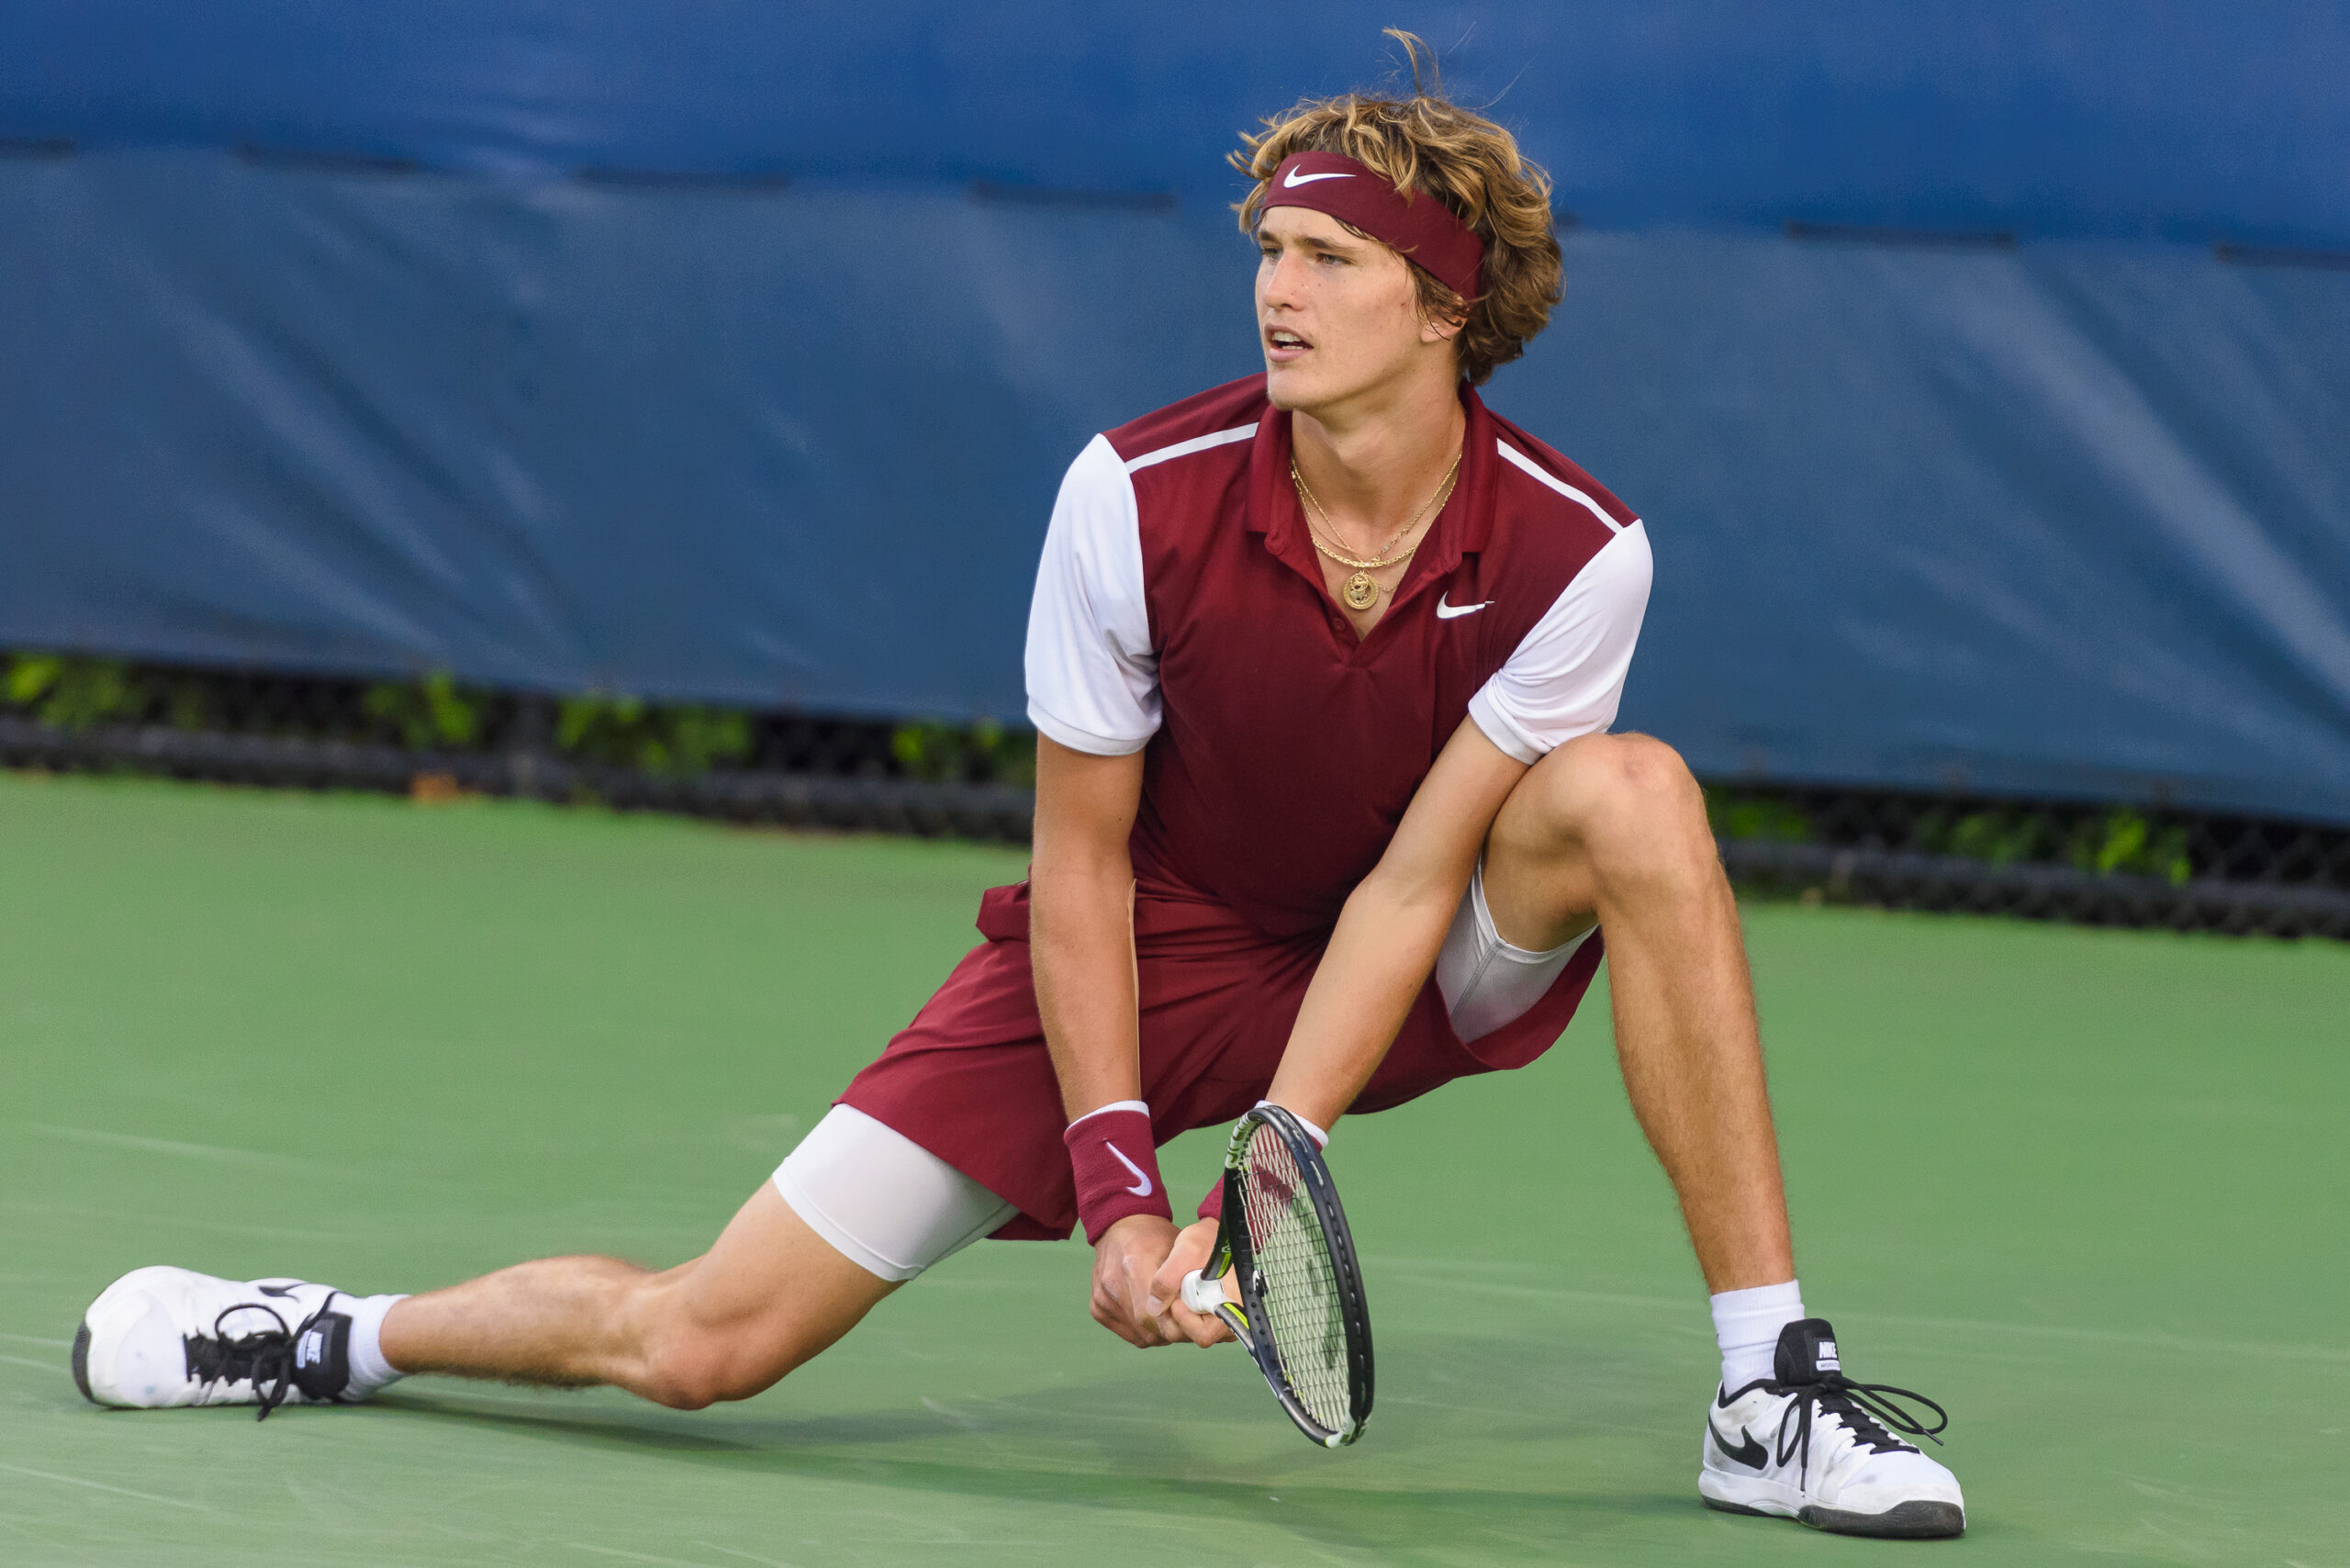 Alexander Zverev became the second German to win ATP Finals on multiple occasions